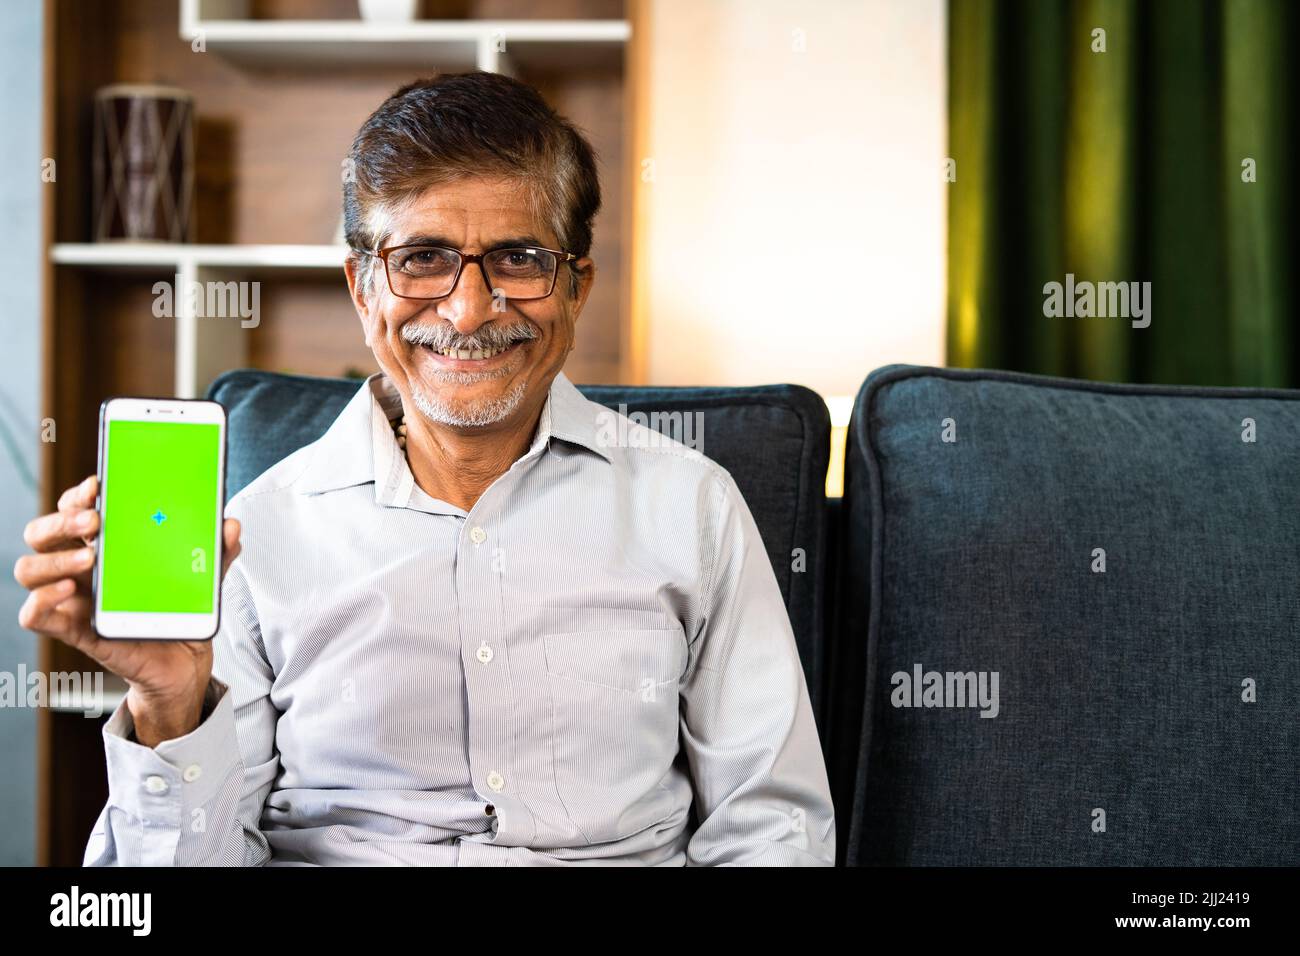 Happy smiling senior man showing green screen mobile phone while sitting on sofa at home with copy space - concept of online app or service promotion Stock Photo